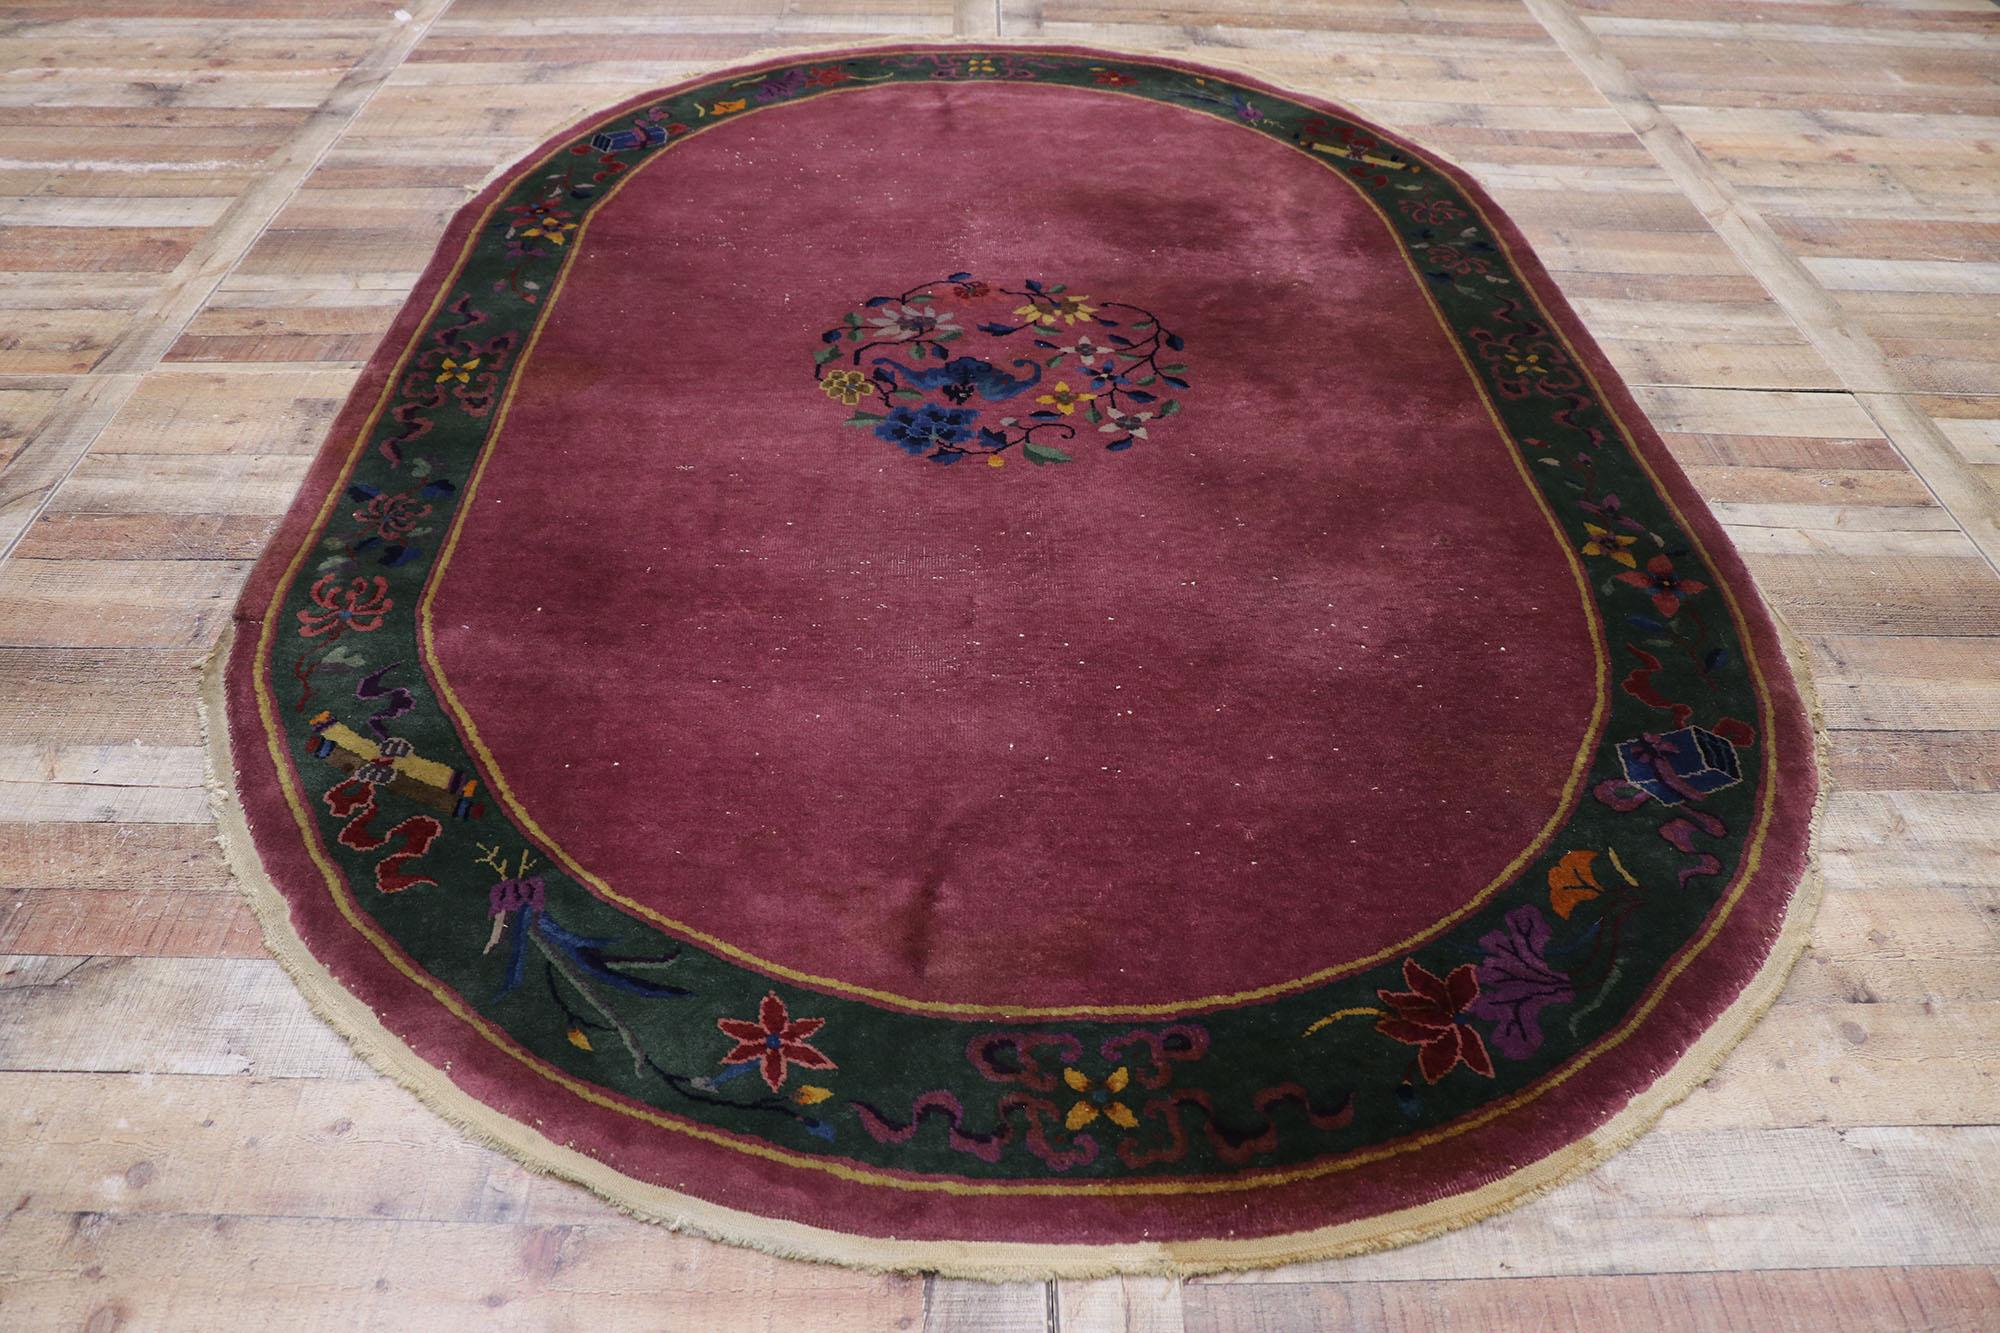 Antique Chinese Art Deco Oval Rug Inspired by Walter Nichols 1